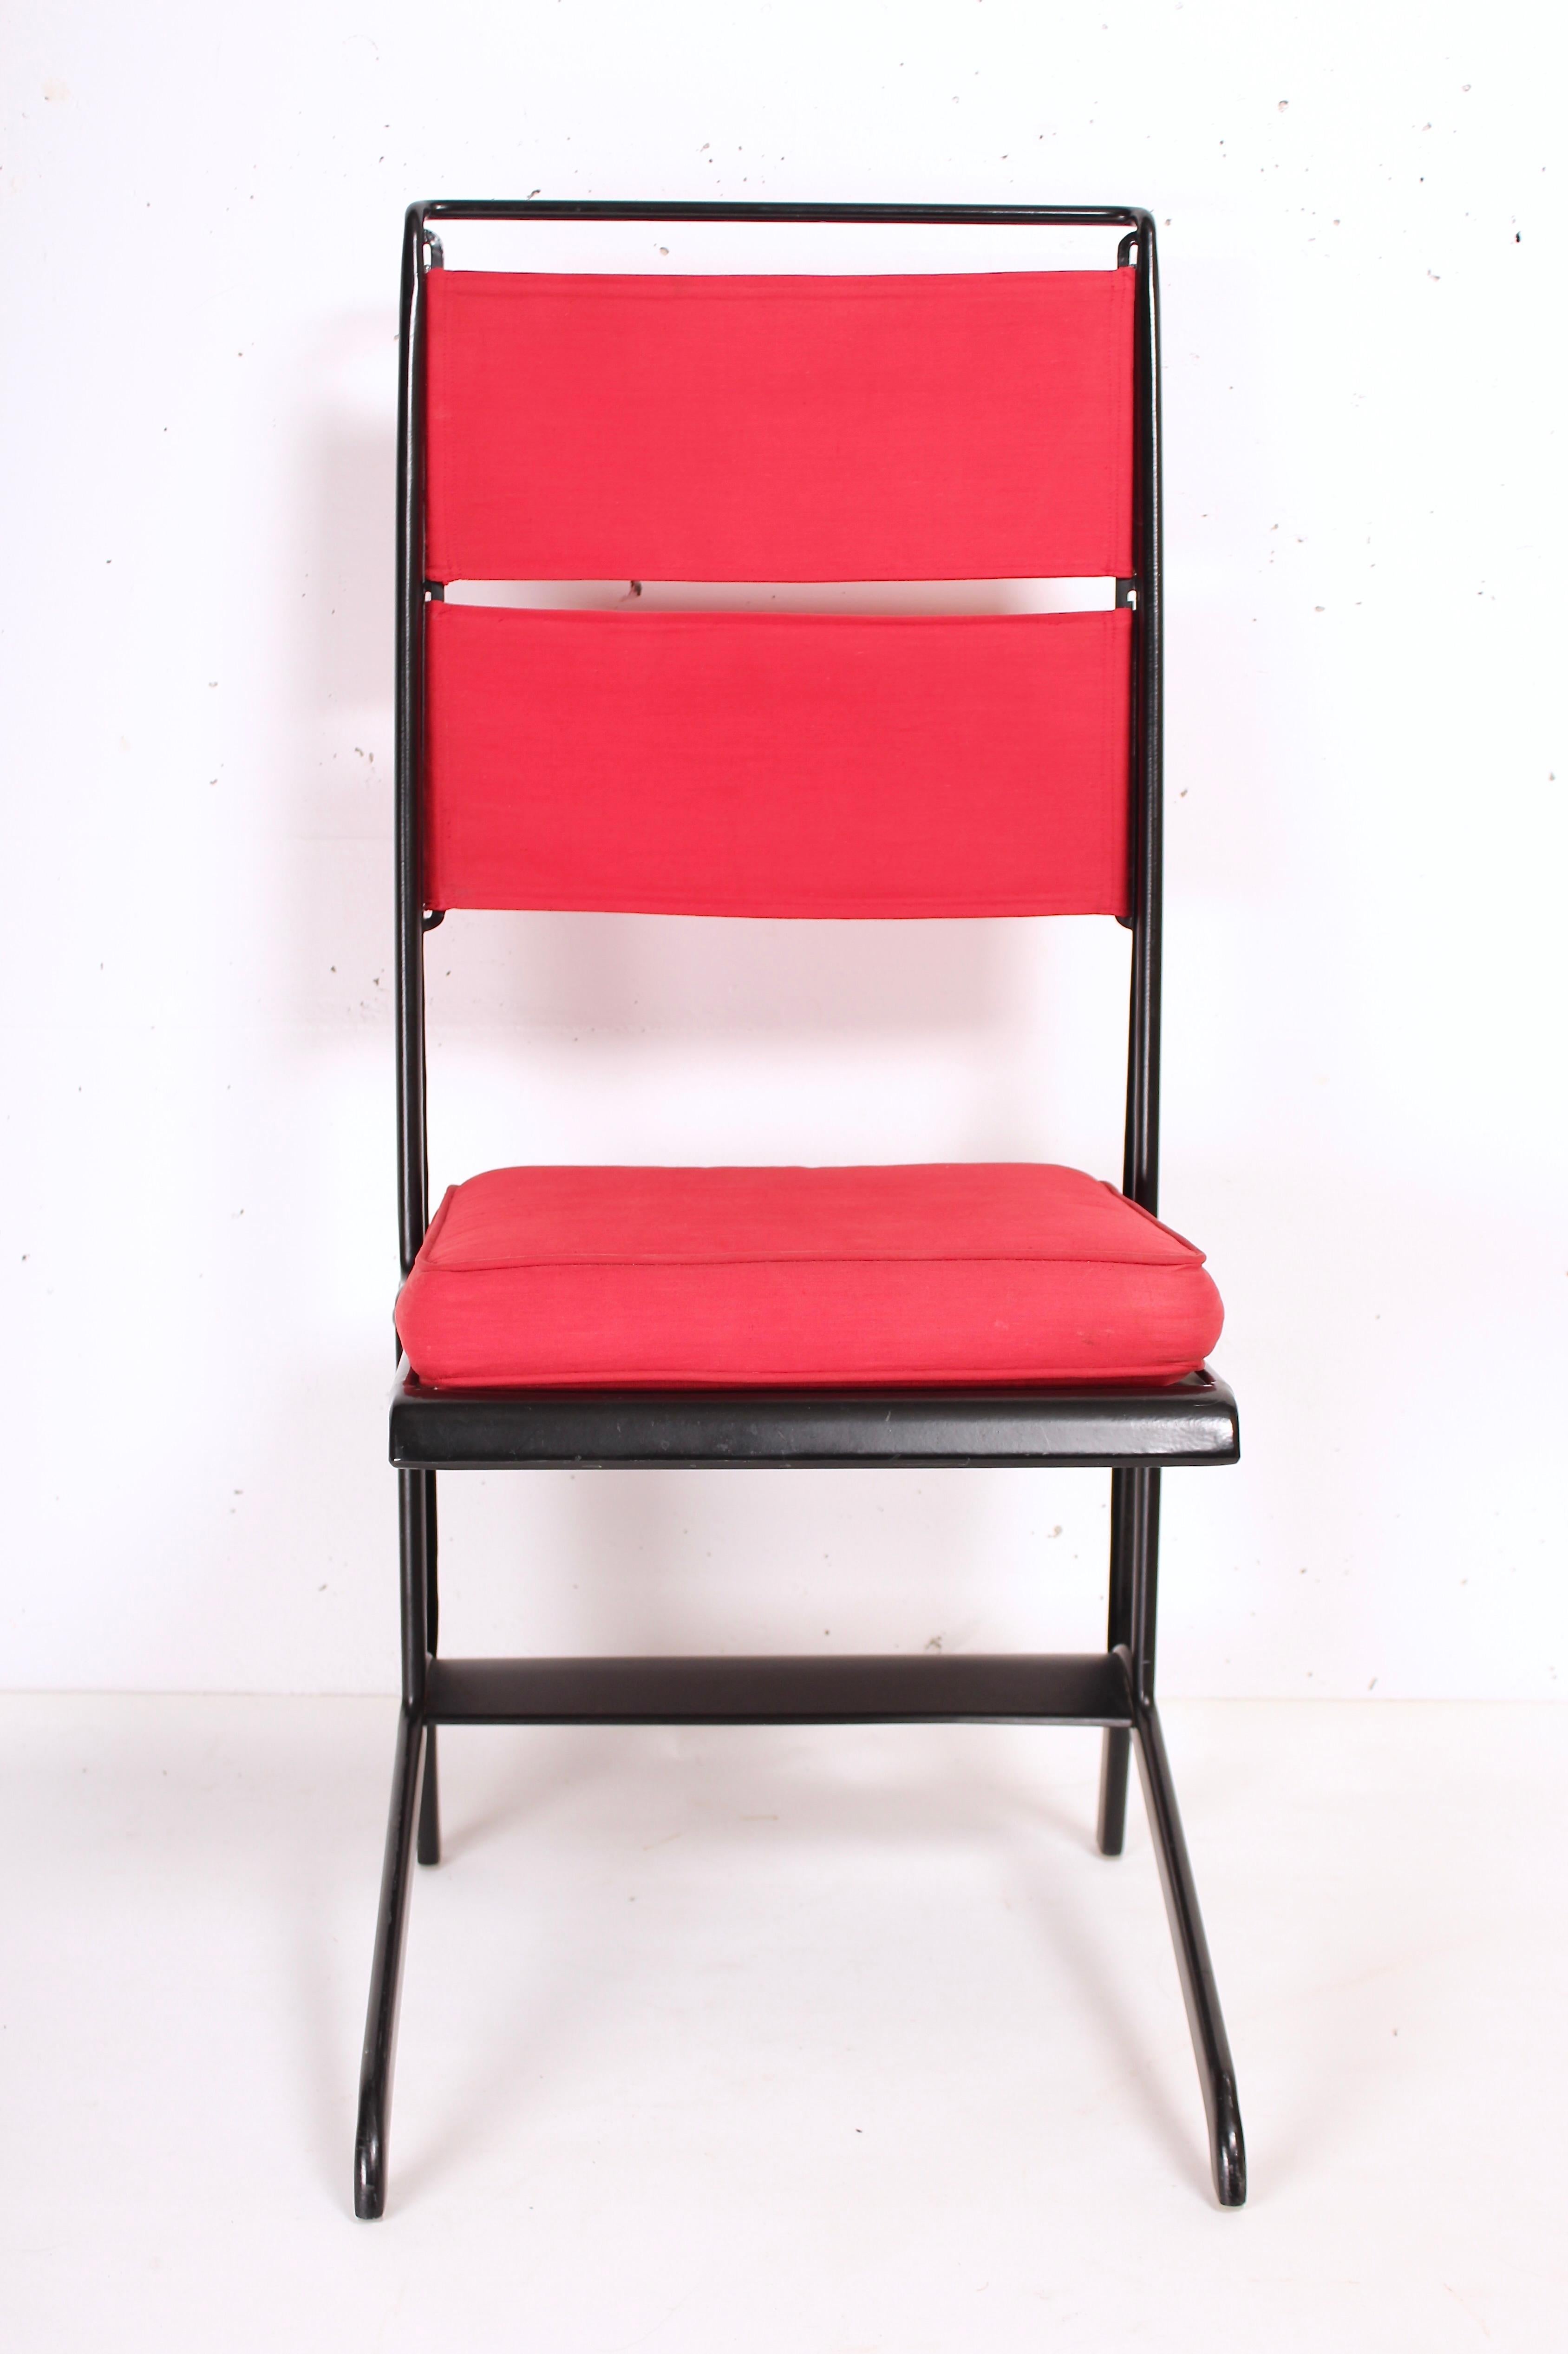 French Jean Prouvé Folding Chair Designed 1930, Manufactured by Tecta, 1983 For Sale